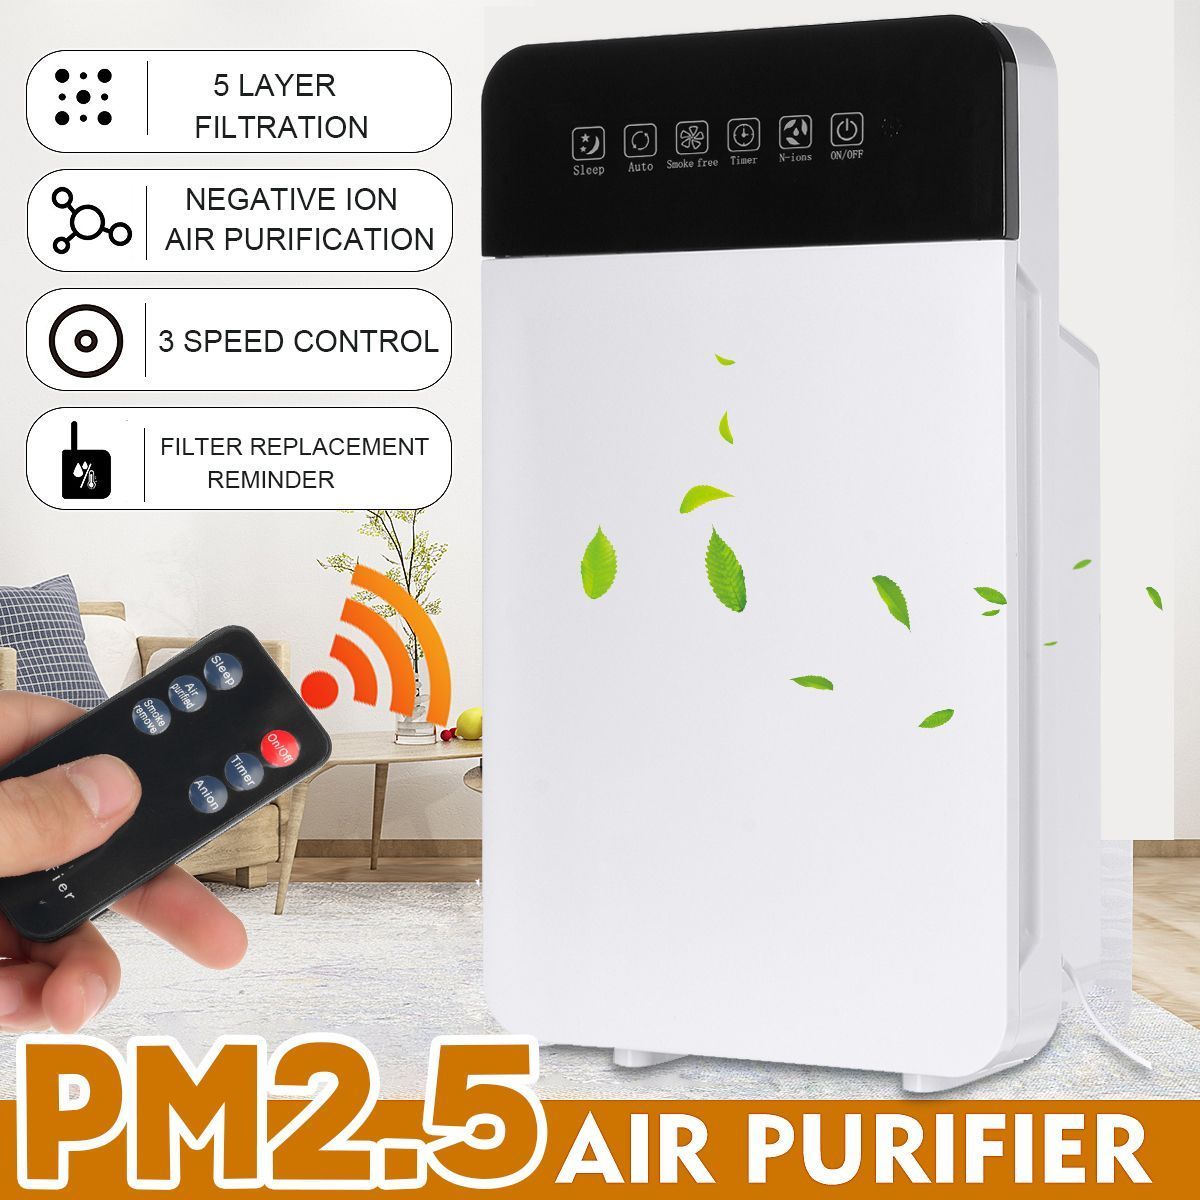 Air-Purifier-Negative-Ions-Air-Cleaner-Remove-Formaldehyde-PM25-W-HEPA-Filter-1628421